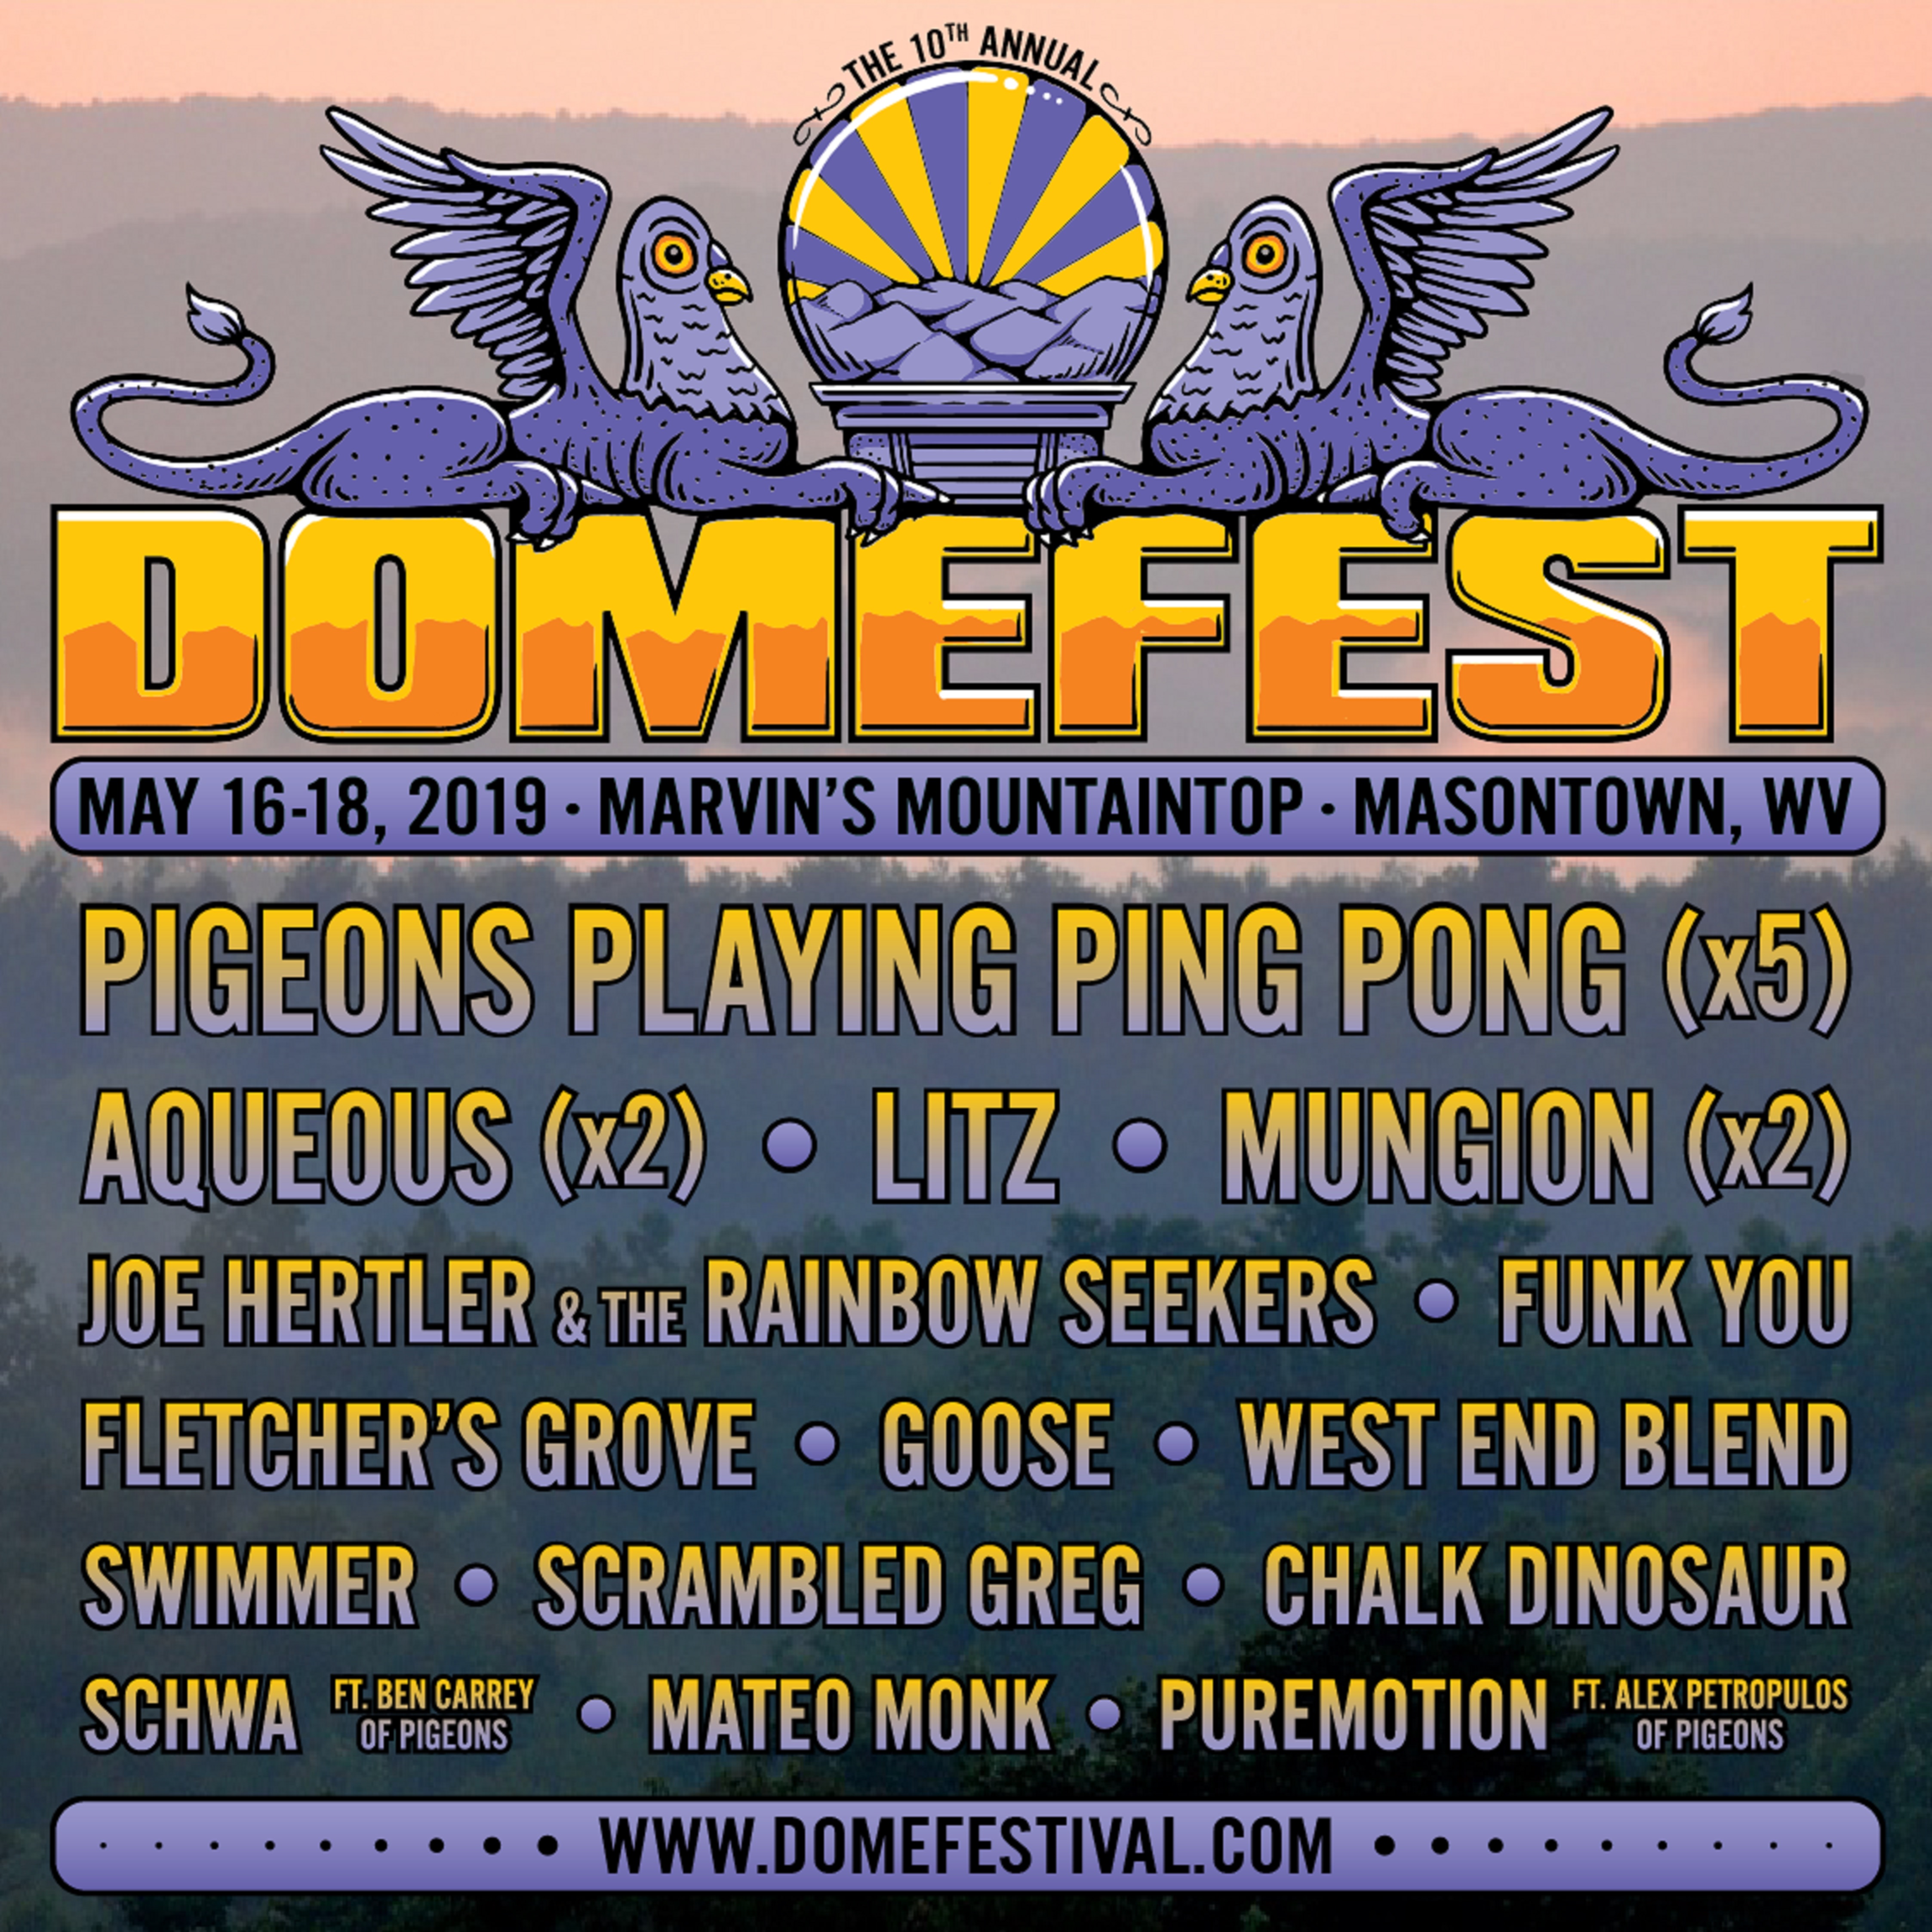 Pigeons Playing Ping Pong Share Initial Lineup For 10th Annual Domefest